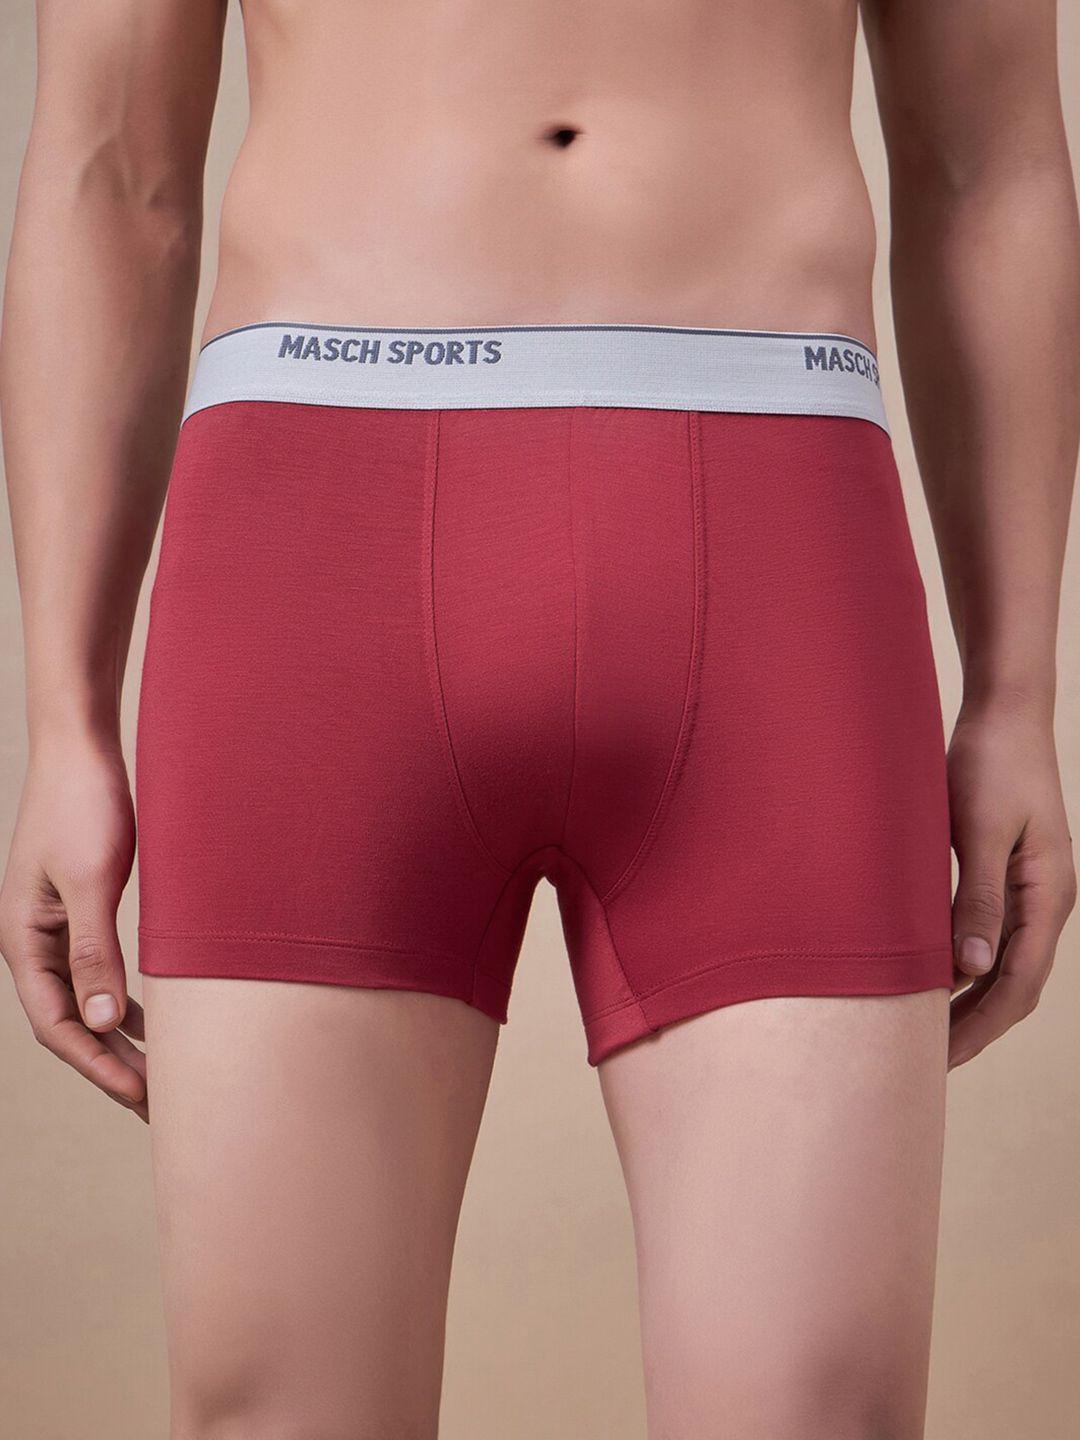 masch sports anti microbial trunks trk-1-sol-et-red